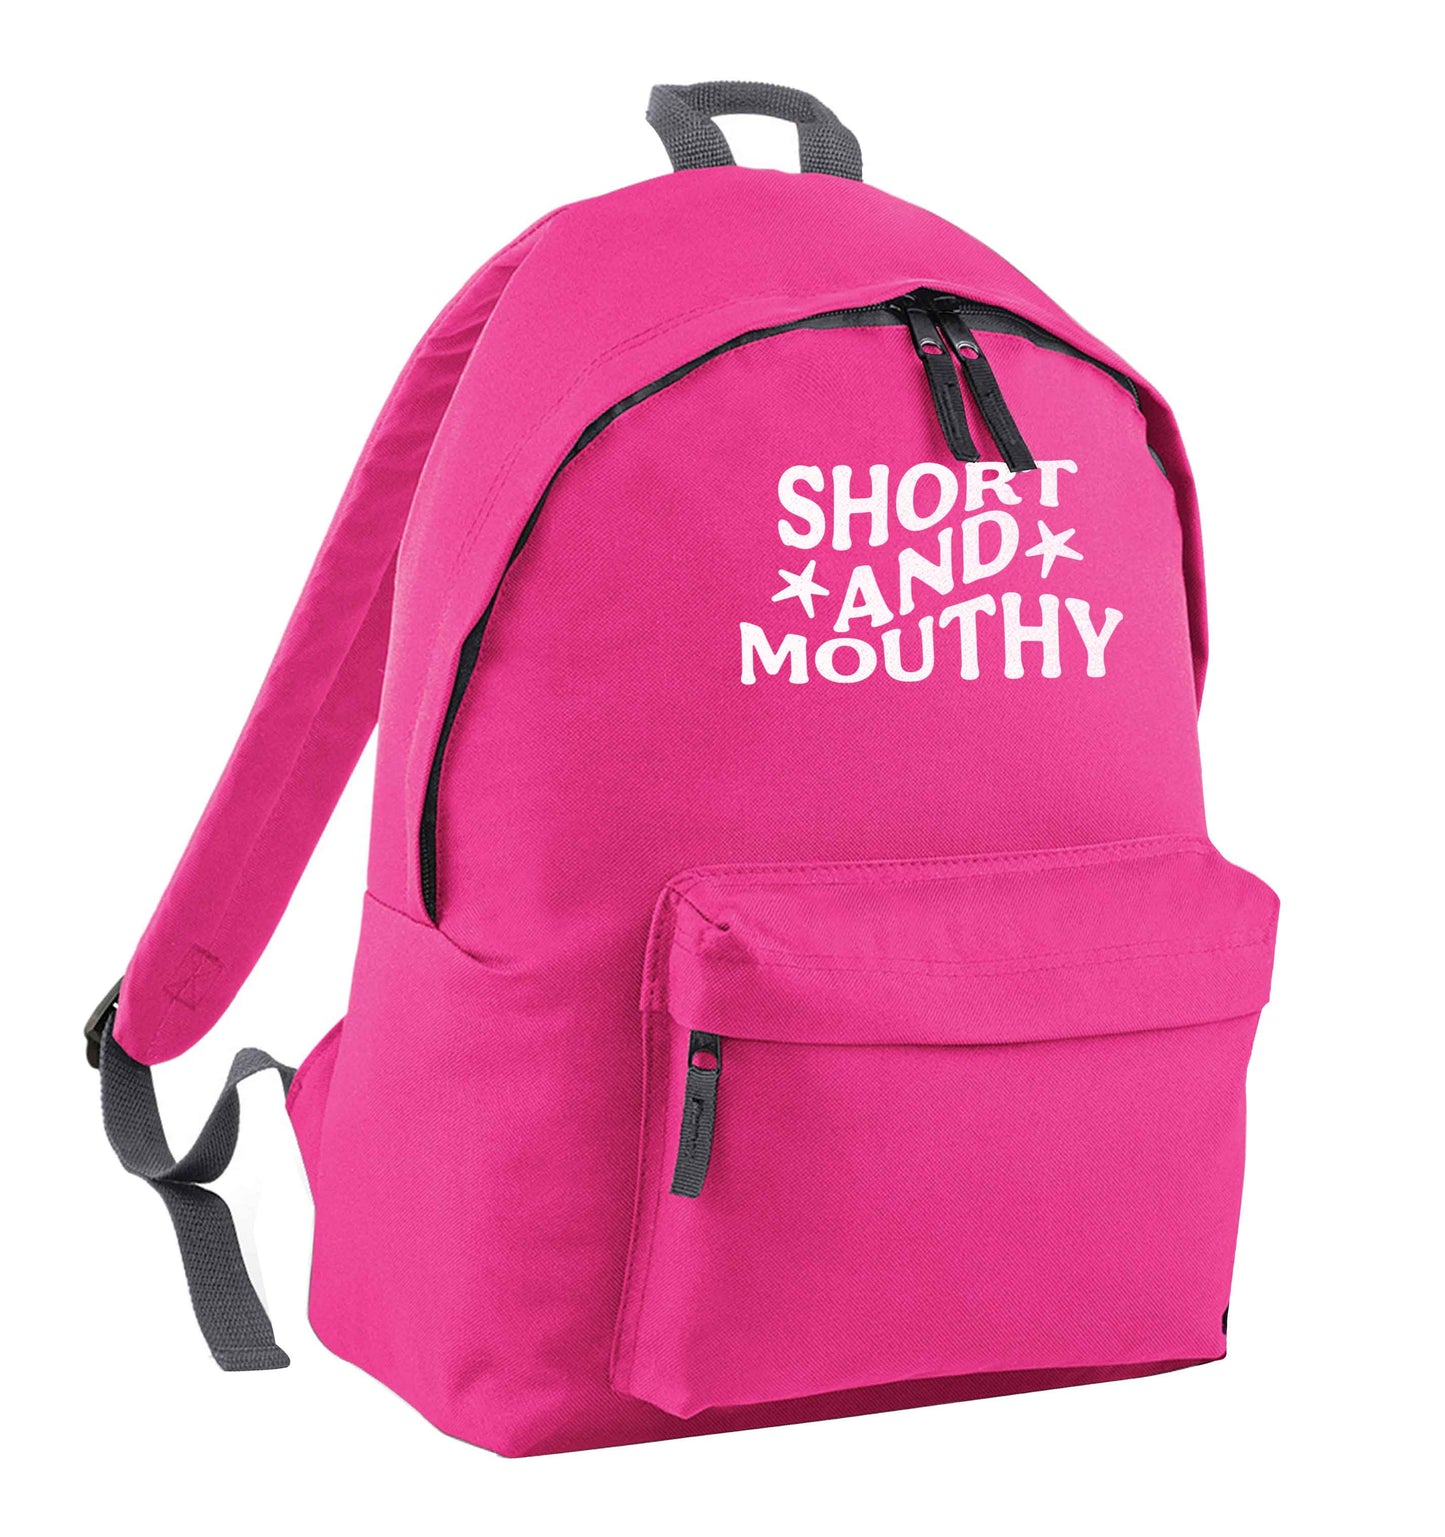 Short and mouthy pink children's backpack